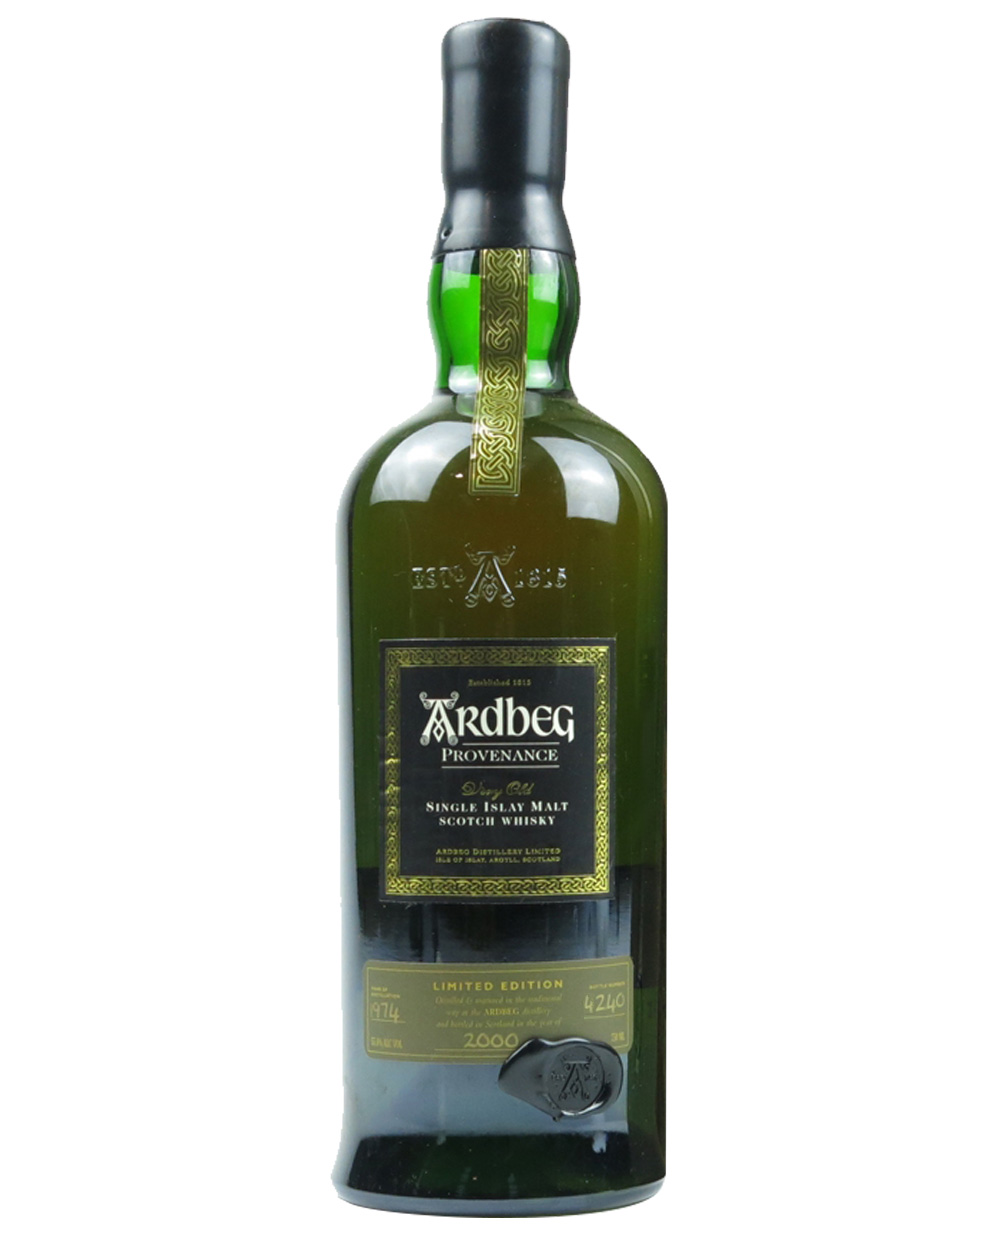 Ardbeg 1974 Provenance - 4th Release (25 years Old)